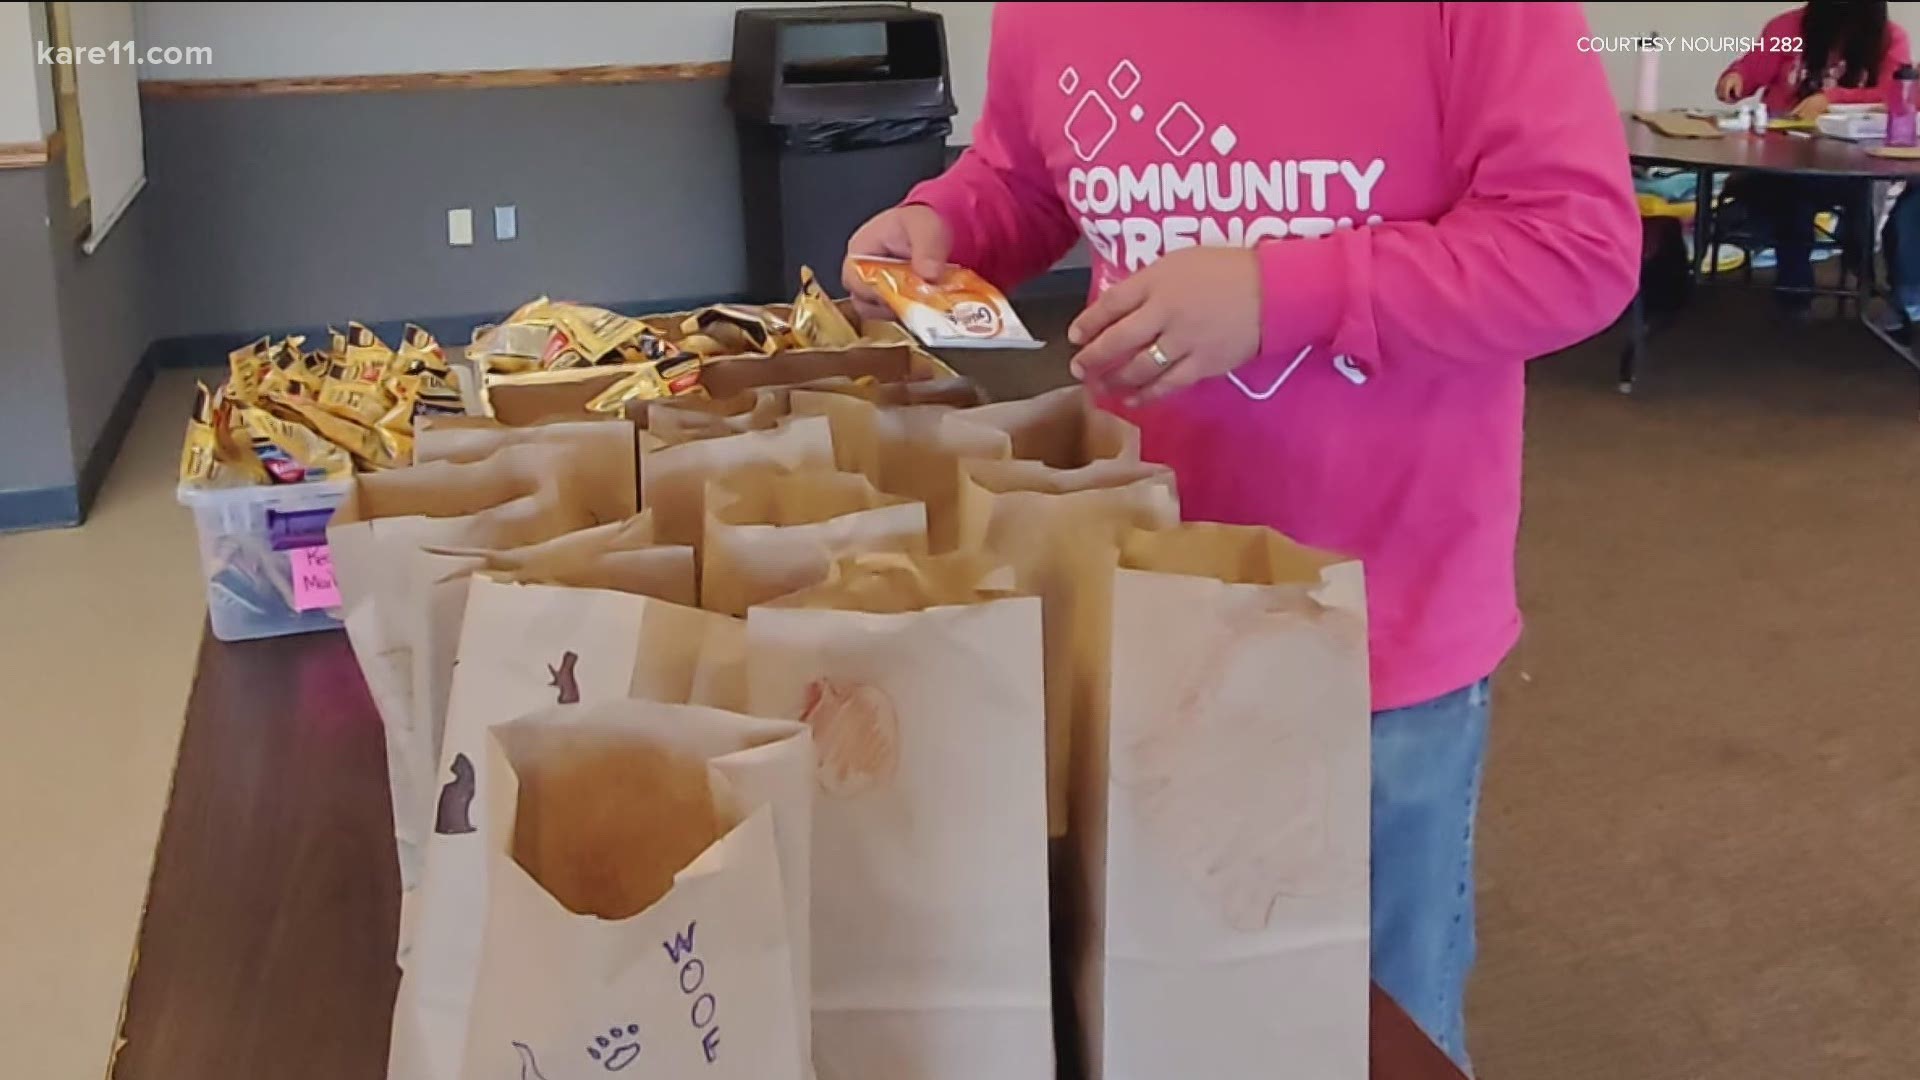 Local organizations are putting in the extra effort to serve their neighbors